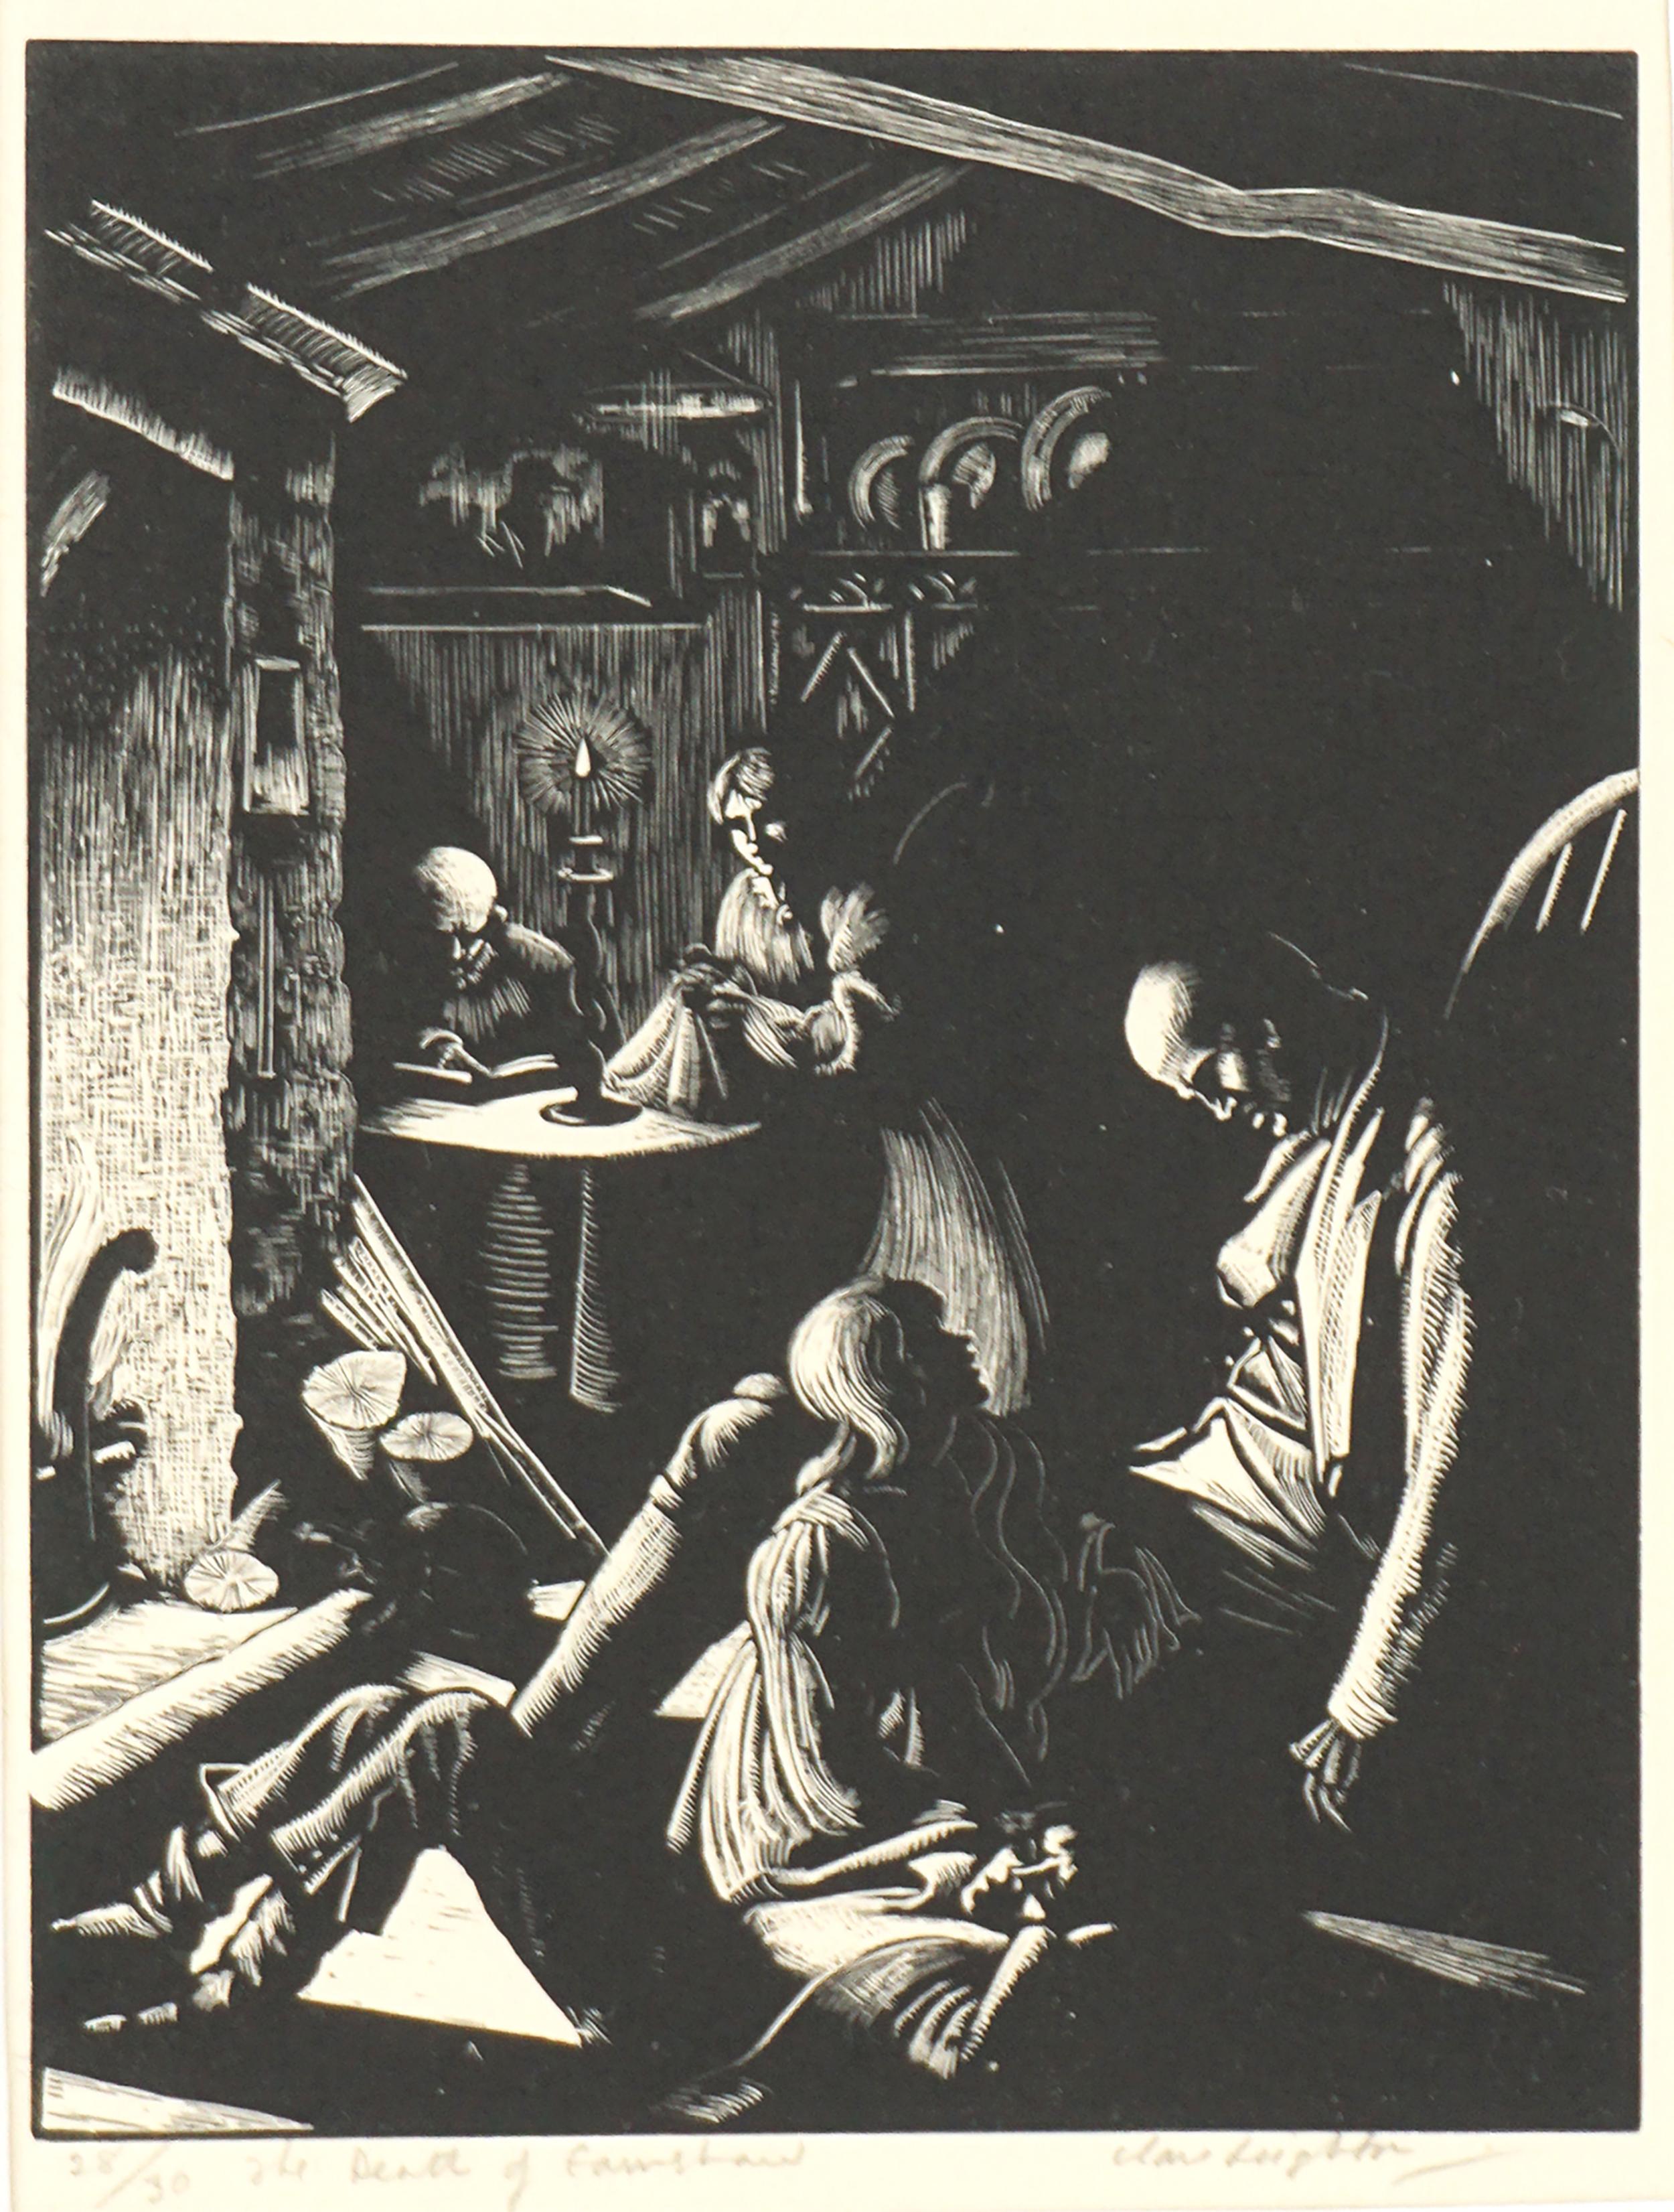 Early 20th Century Wuthering Heights Genre Woodcut -- Death of Earnshaw #28/30 - Print by Clare Leighton